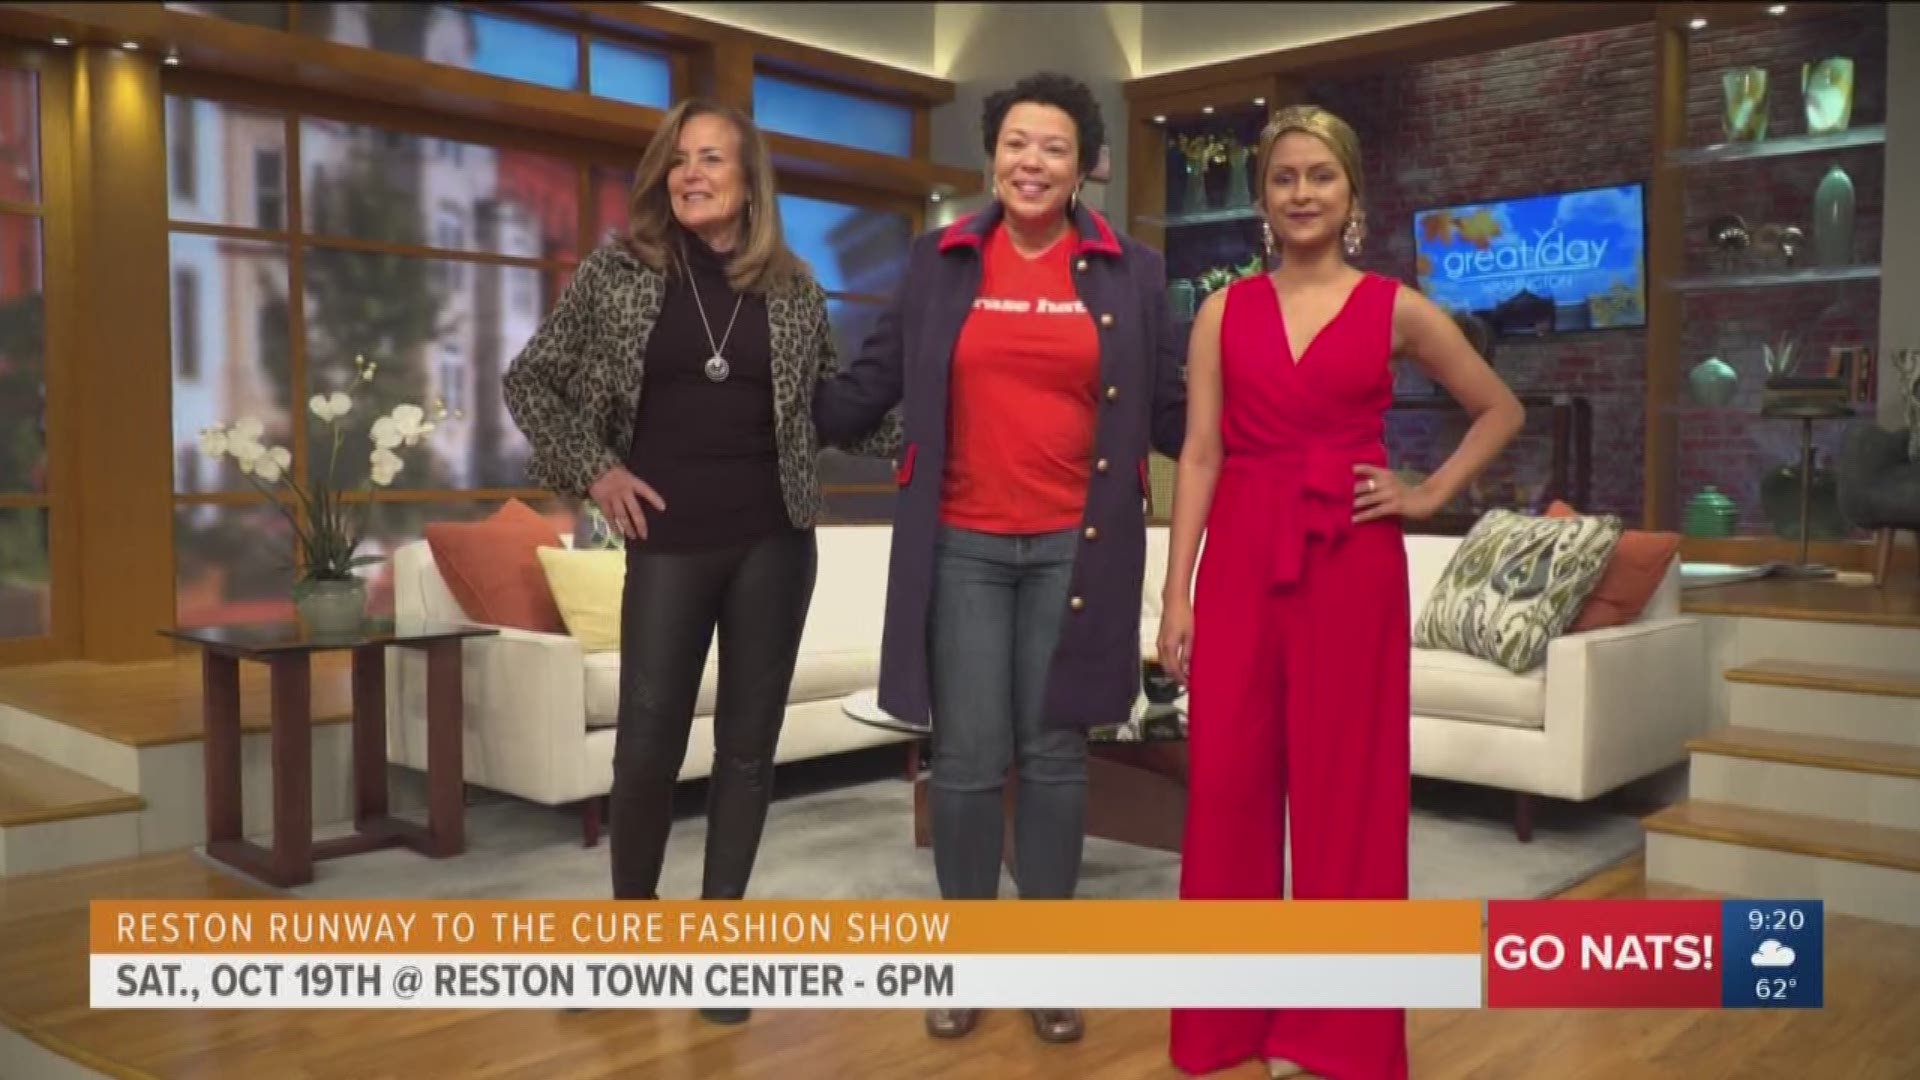 Jane Abraham and Theresa Goudie discuss the Reston Runway to the Cure fashion show. The fashion show will be Oct. 19, 2019 at 6 p.m. at the Reston Town Center.